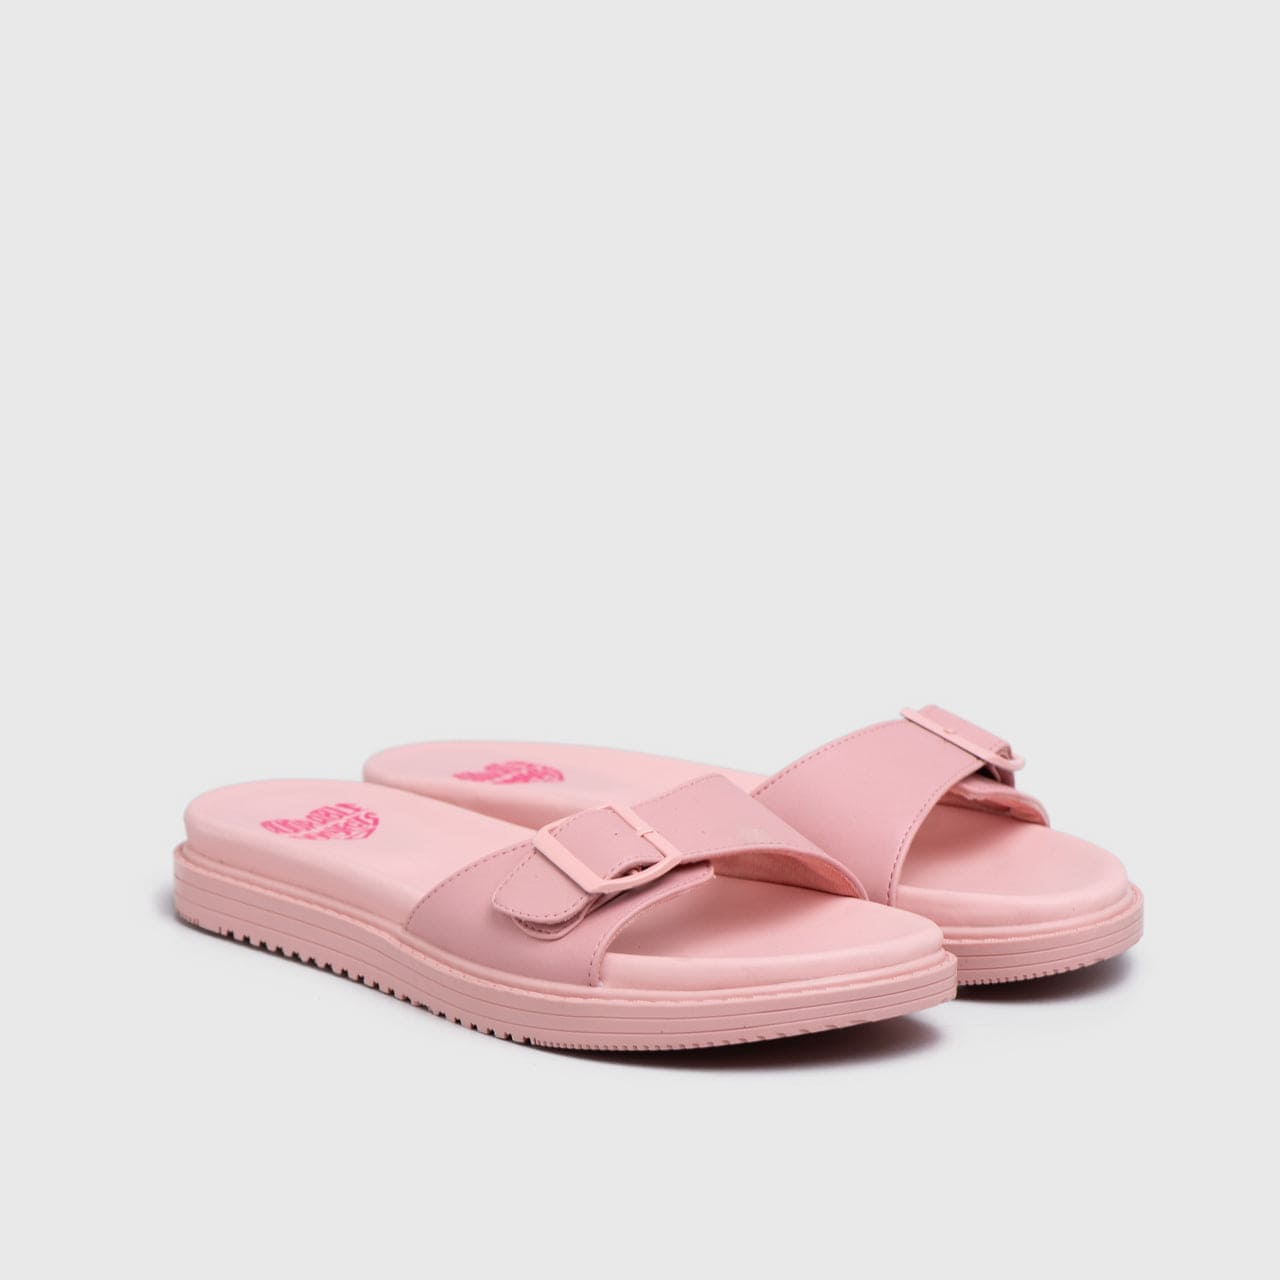 Adorable Projects Official 37 Adorableprojects - Yurinta Sandals Pink - Sendal Wanita